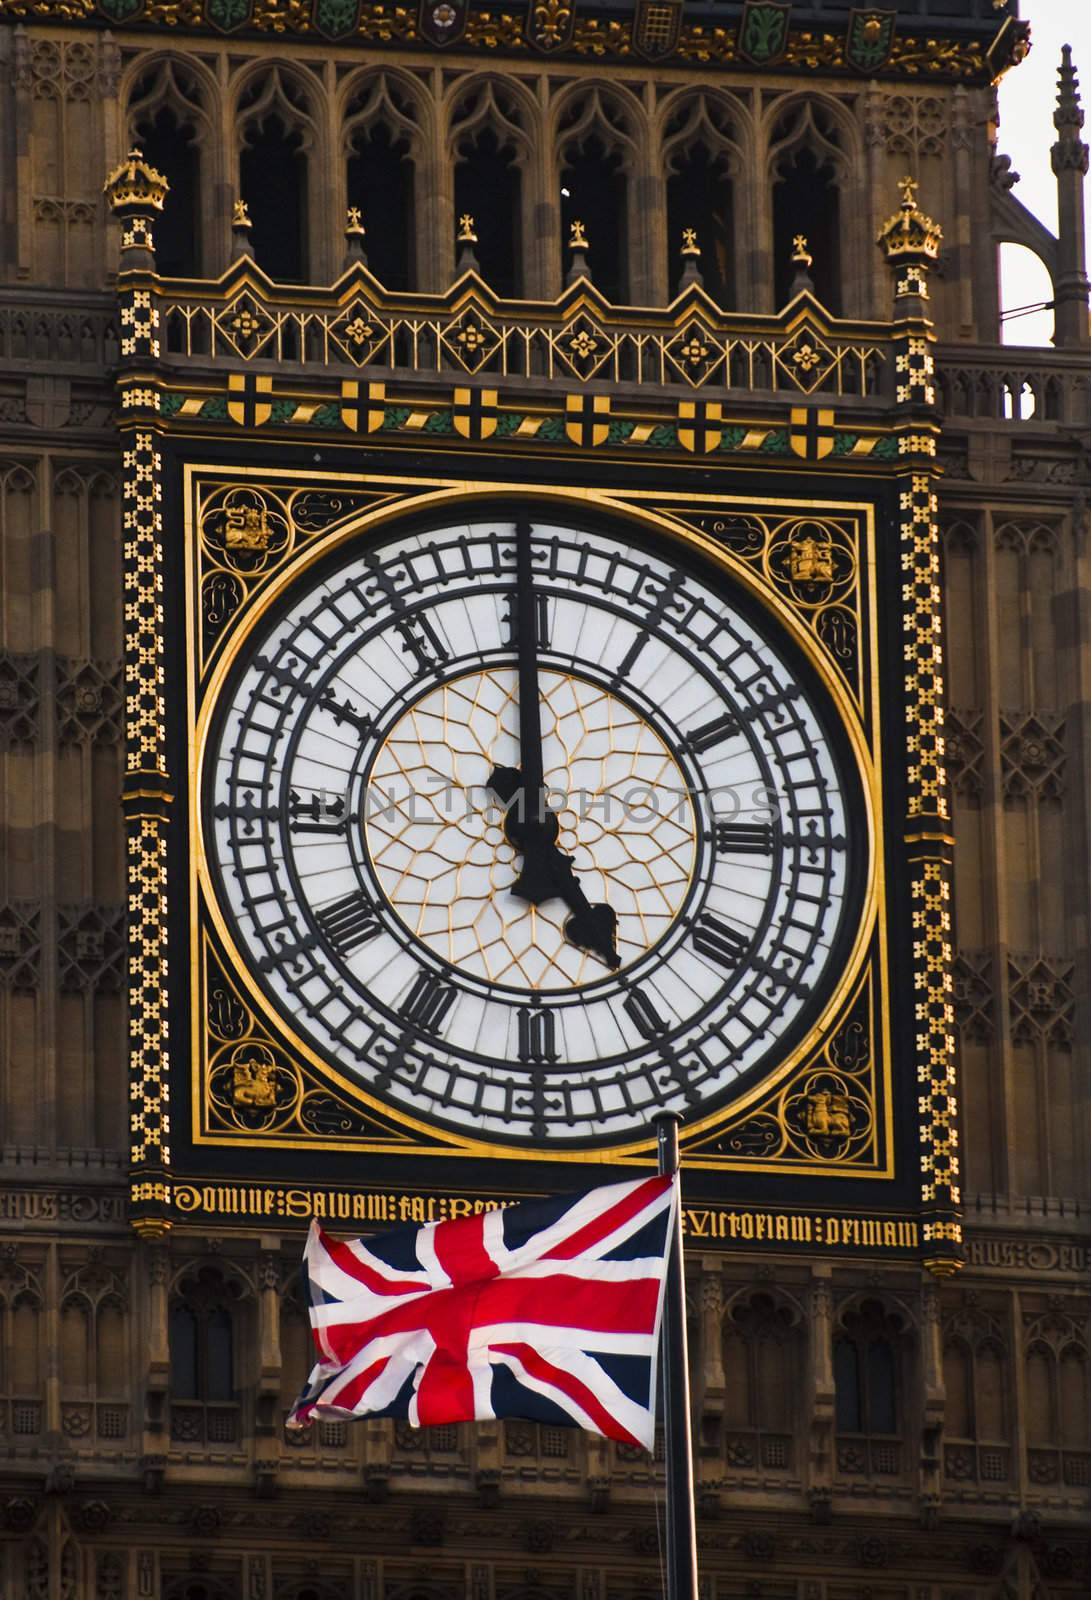 The Clock Tower and the British flag by dutourdumonde